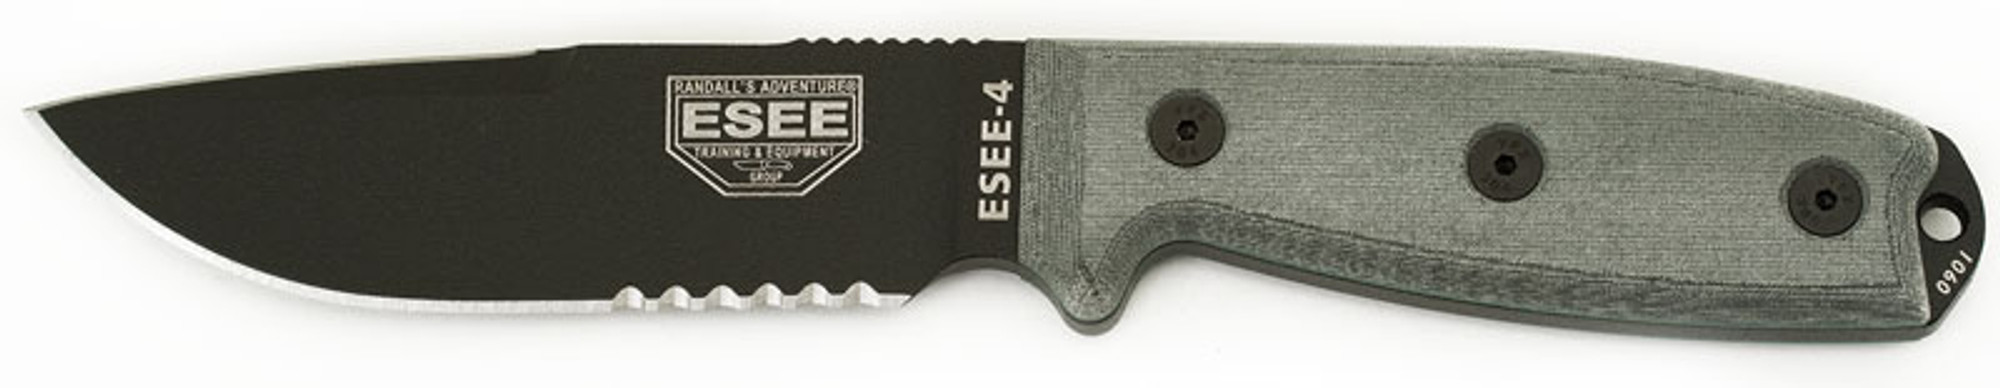 ESEE 4S-CP-MB Black Blade Clip with Serration, MOLLE Sheath